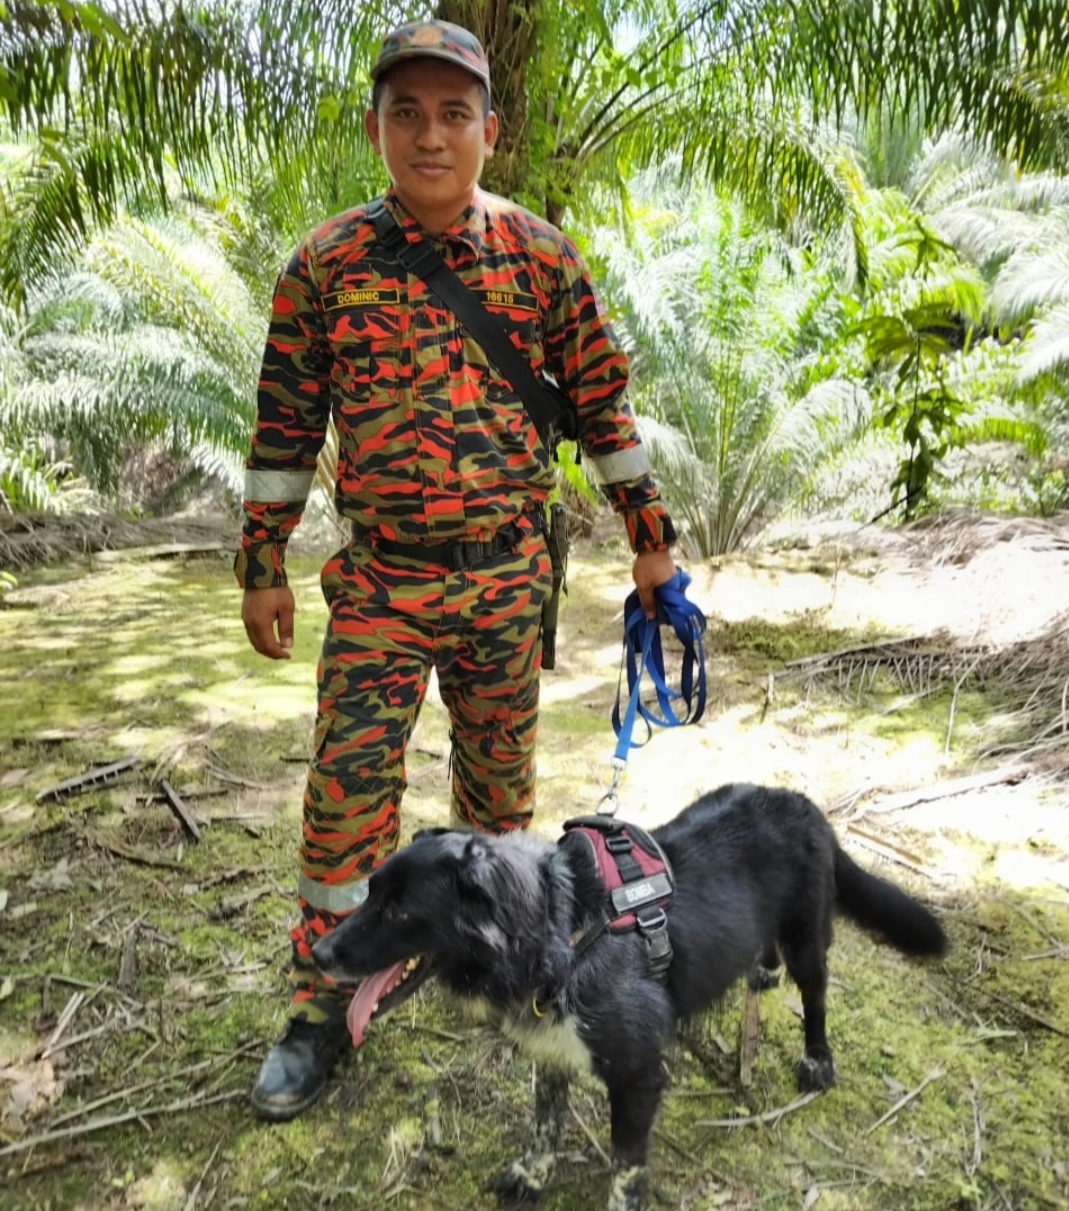 Tracker dog Daisy with her handler, after having found the 2-year-old boy today. – Pic courtesy of Sarawak Fire and Rescue Department, February 16, 2023